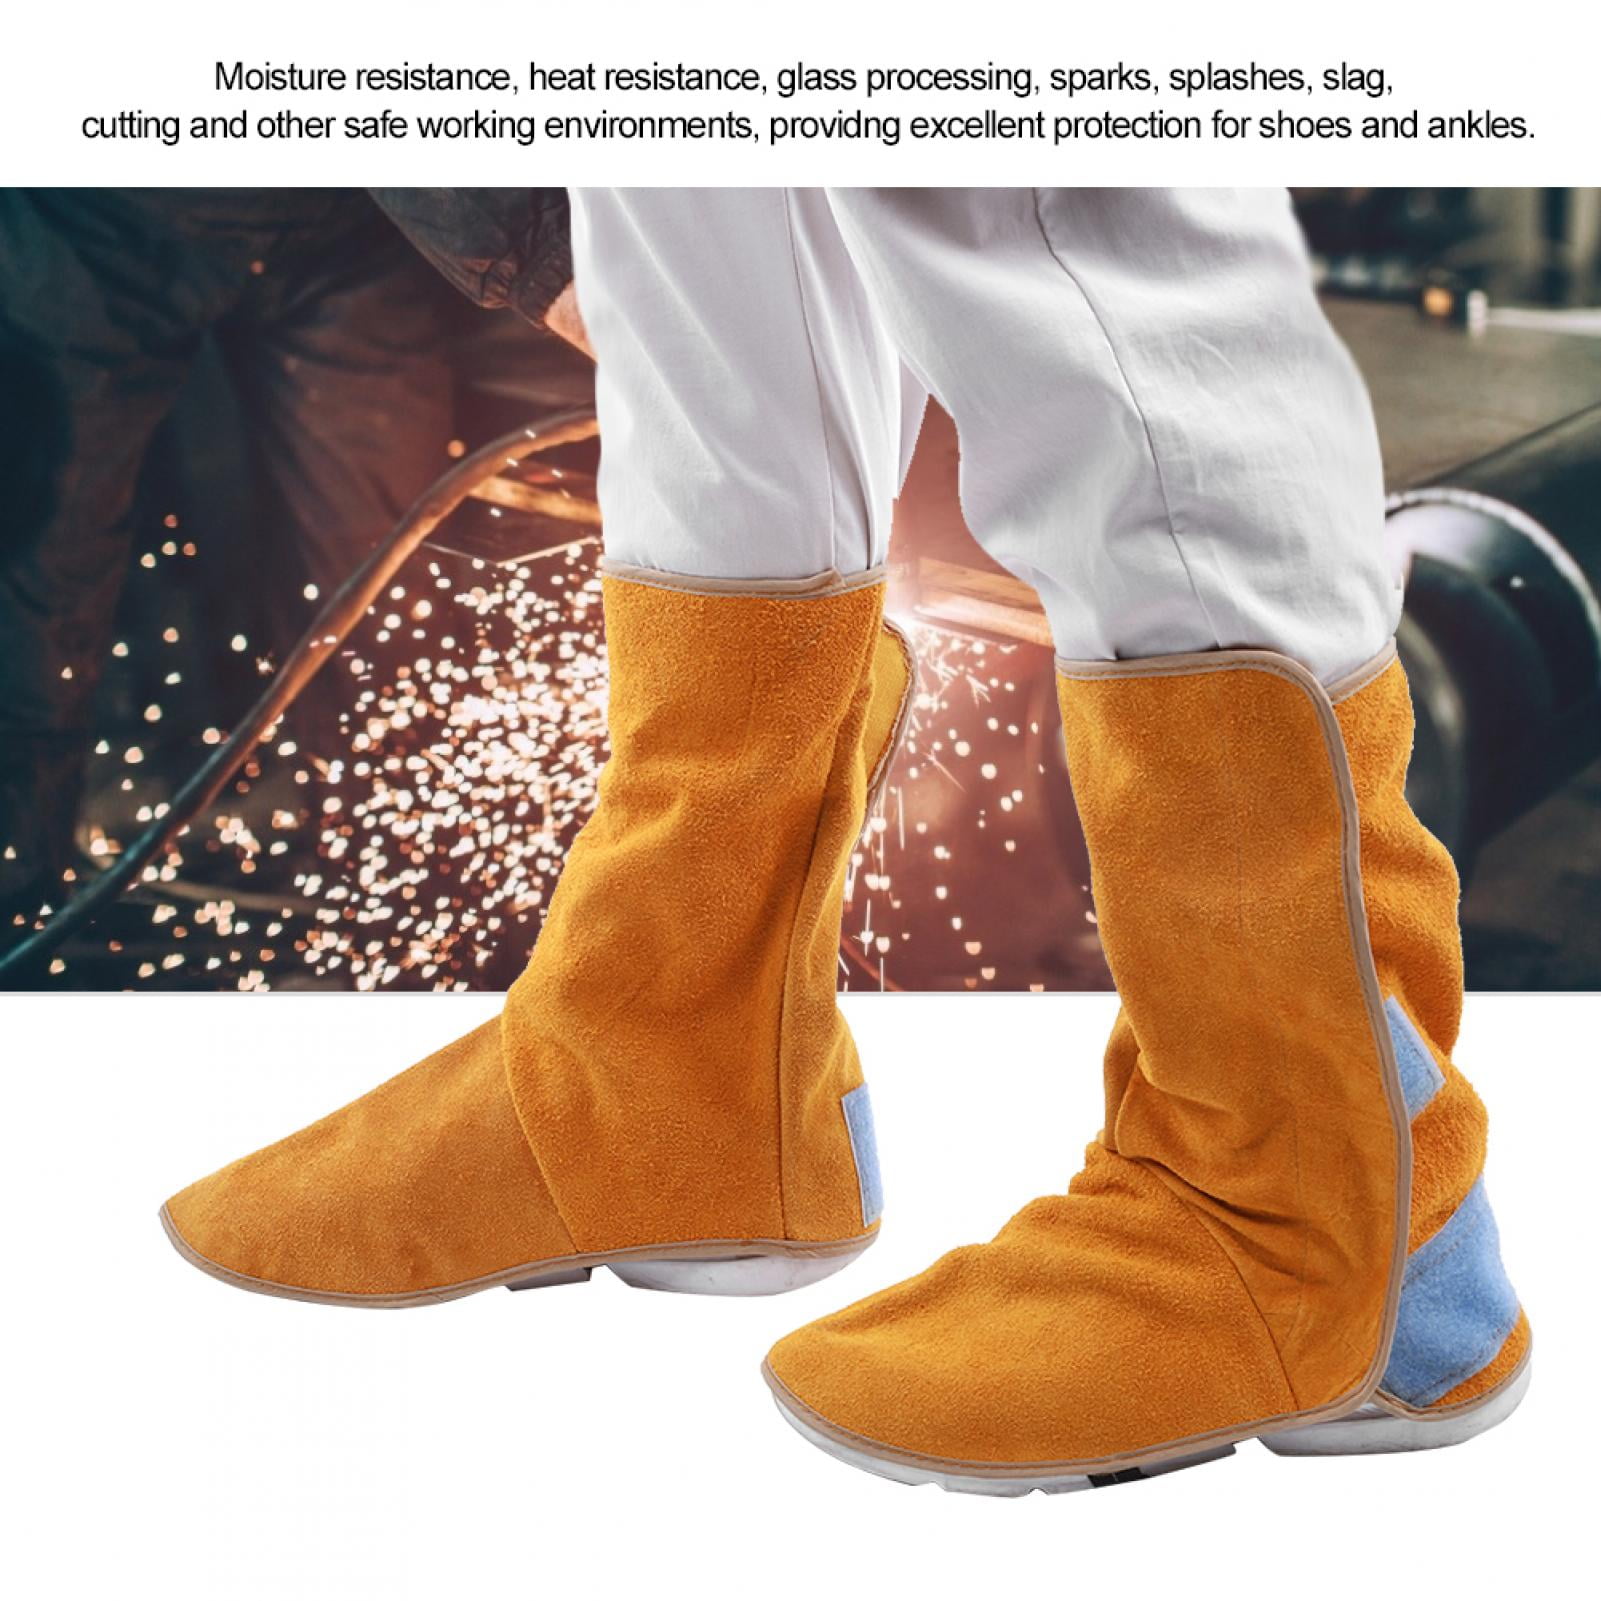 500 x Overshoes Over Shoes Protective Food Safety Professional Catering PPE Shoe 